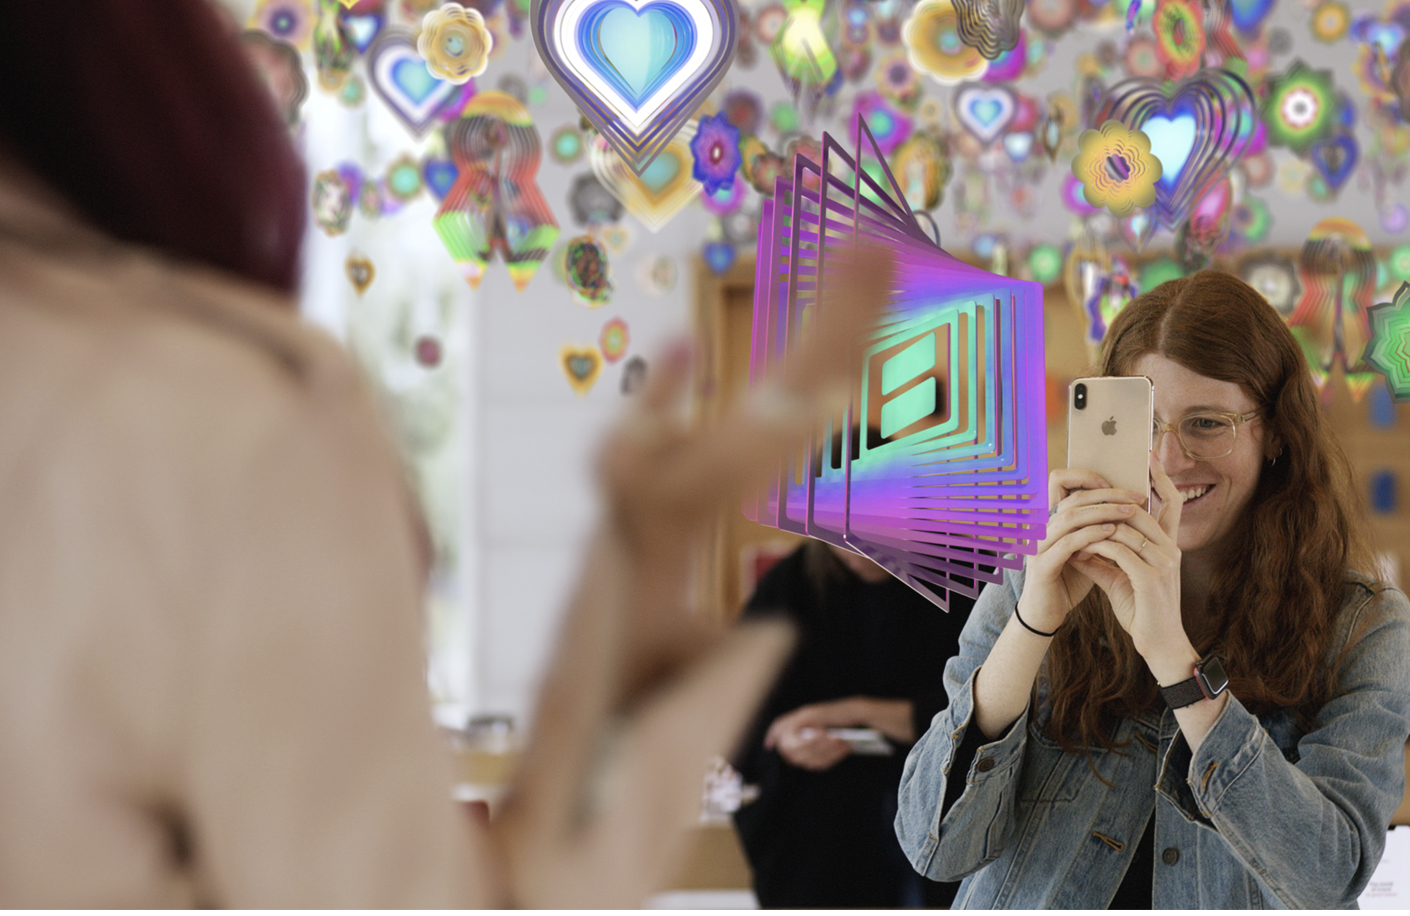 Apple offers new augmented reality art sessions